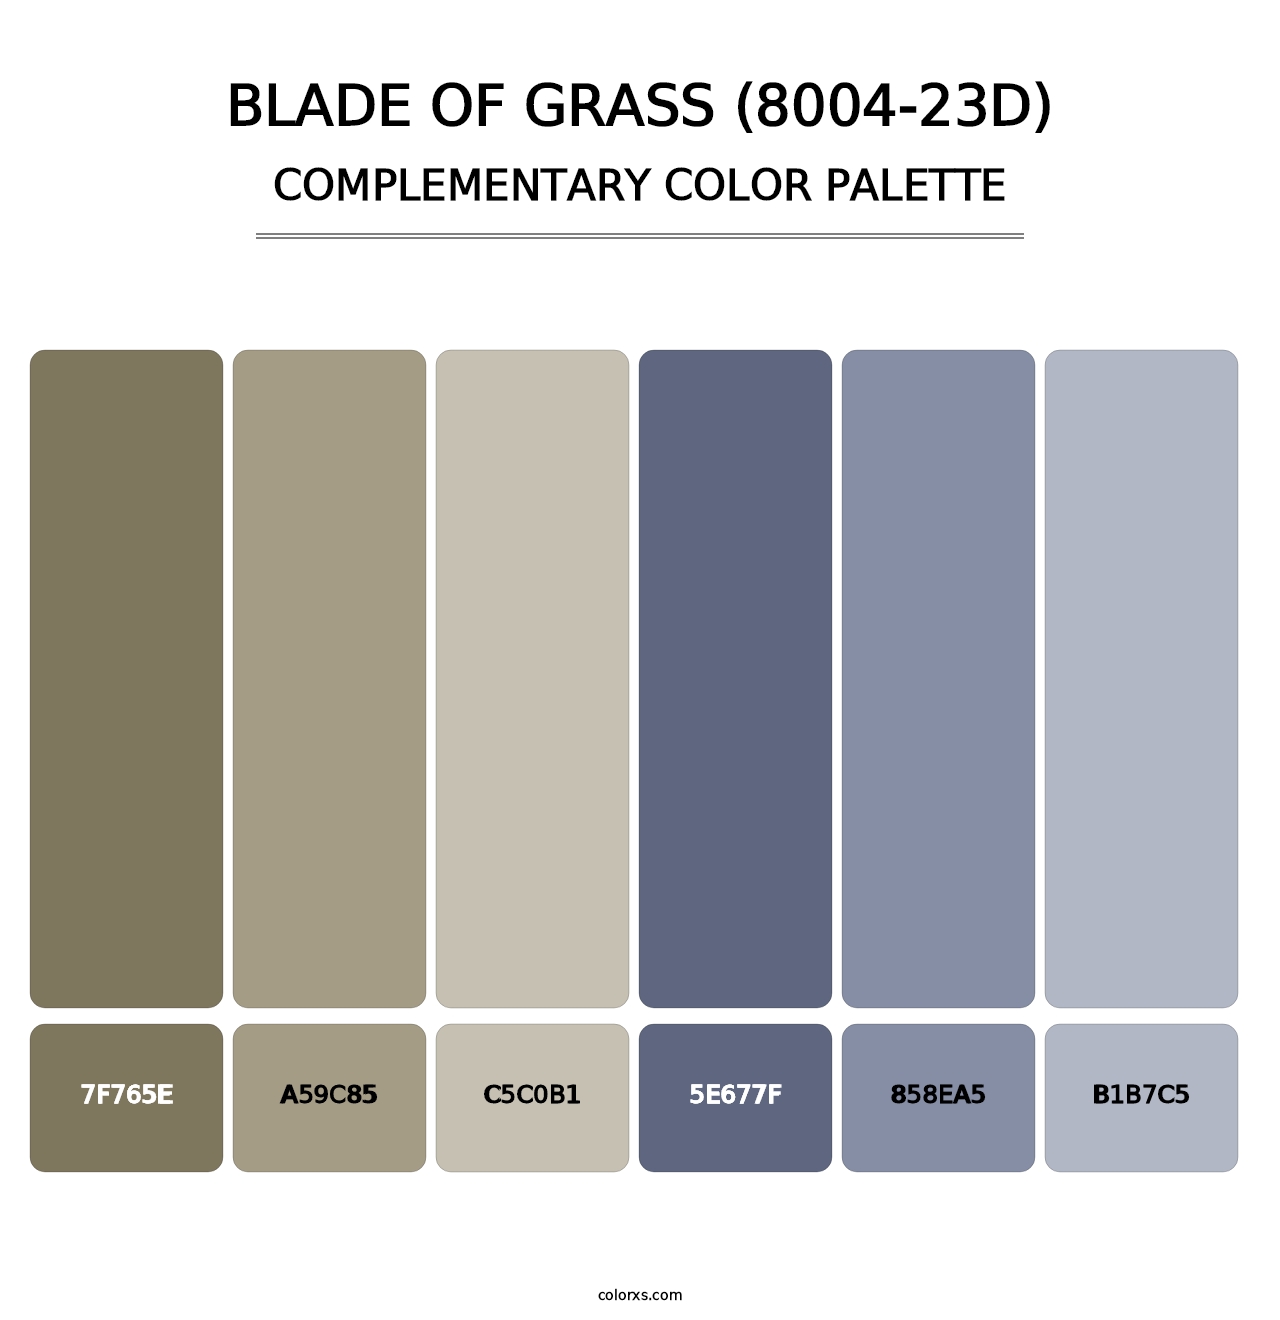 Blade of Grass (8004-23D) - Complementary Color Palette